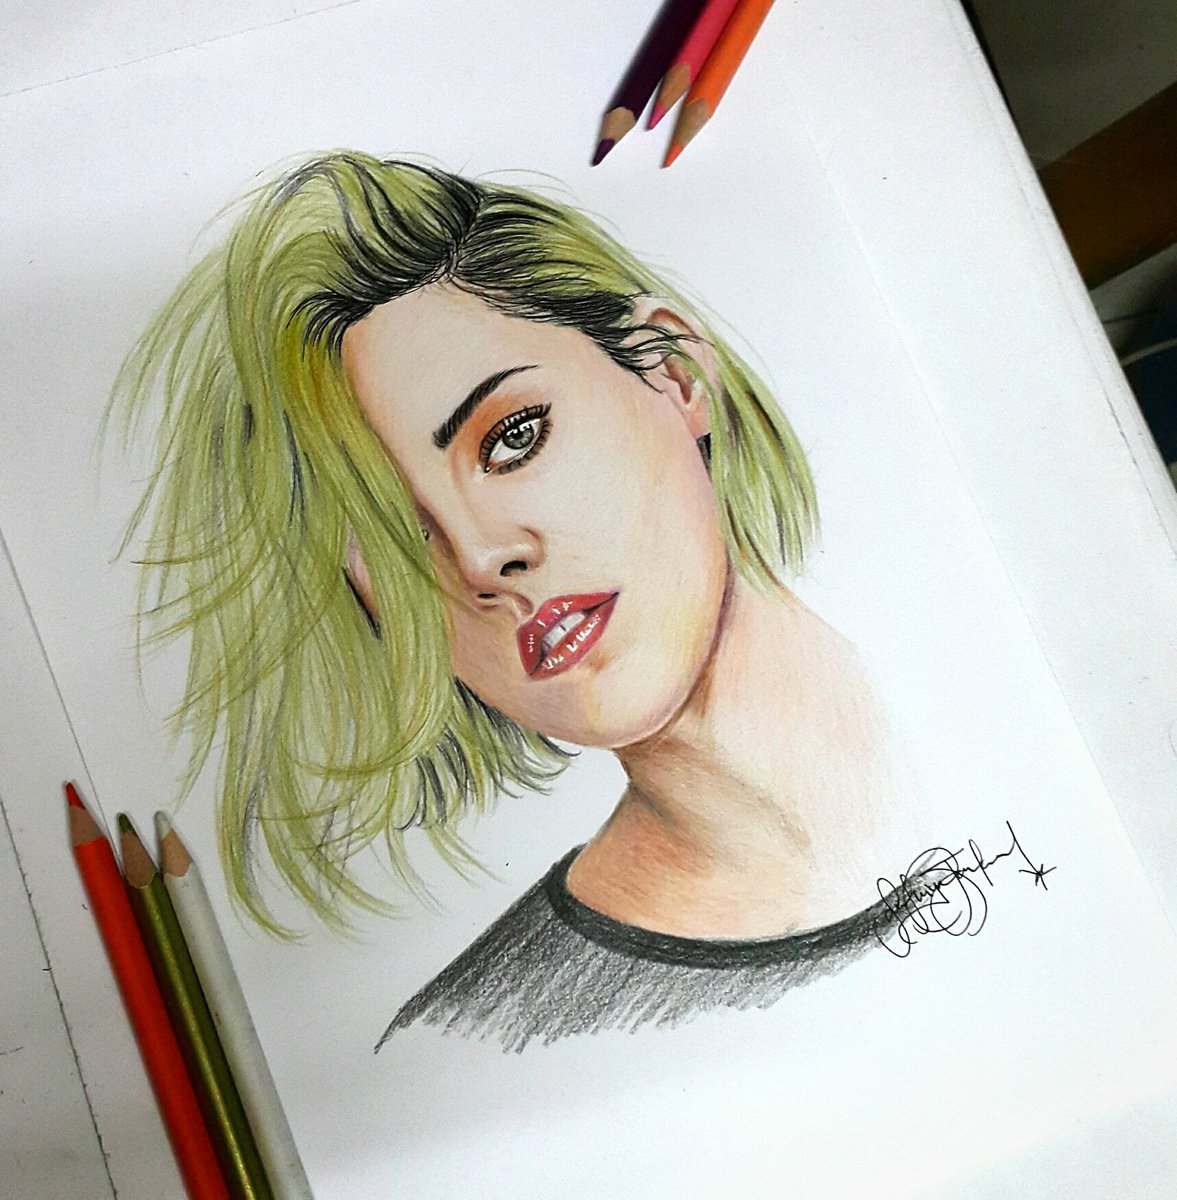 My latest attempt 🙈 what do you guys think about it ? 
Dis is d first time I did a coloured portrait 😝😂pls don't judge me.. Haha 😂
#santhiyajackson #kristen #kristenstewart #stewart #colour #colourart #modeling #realistic #realism #art #artist #artwork #sketch  #drawing